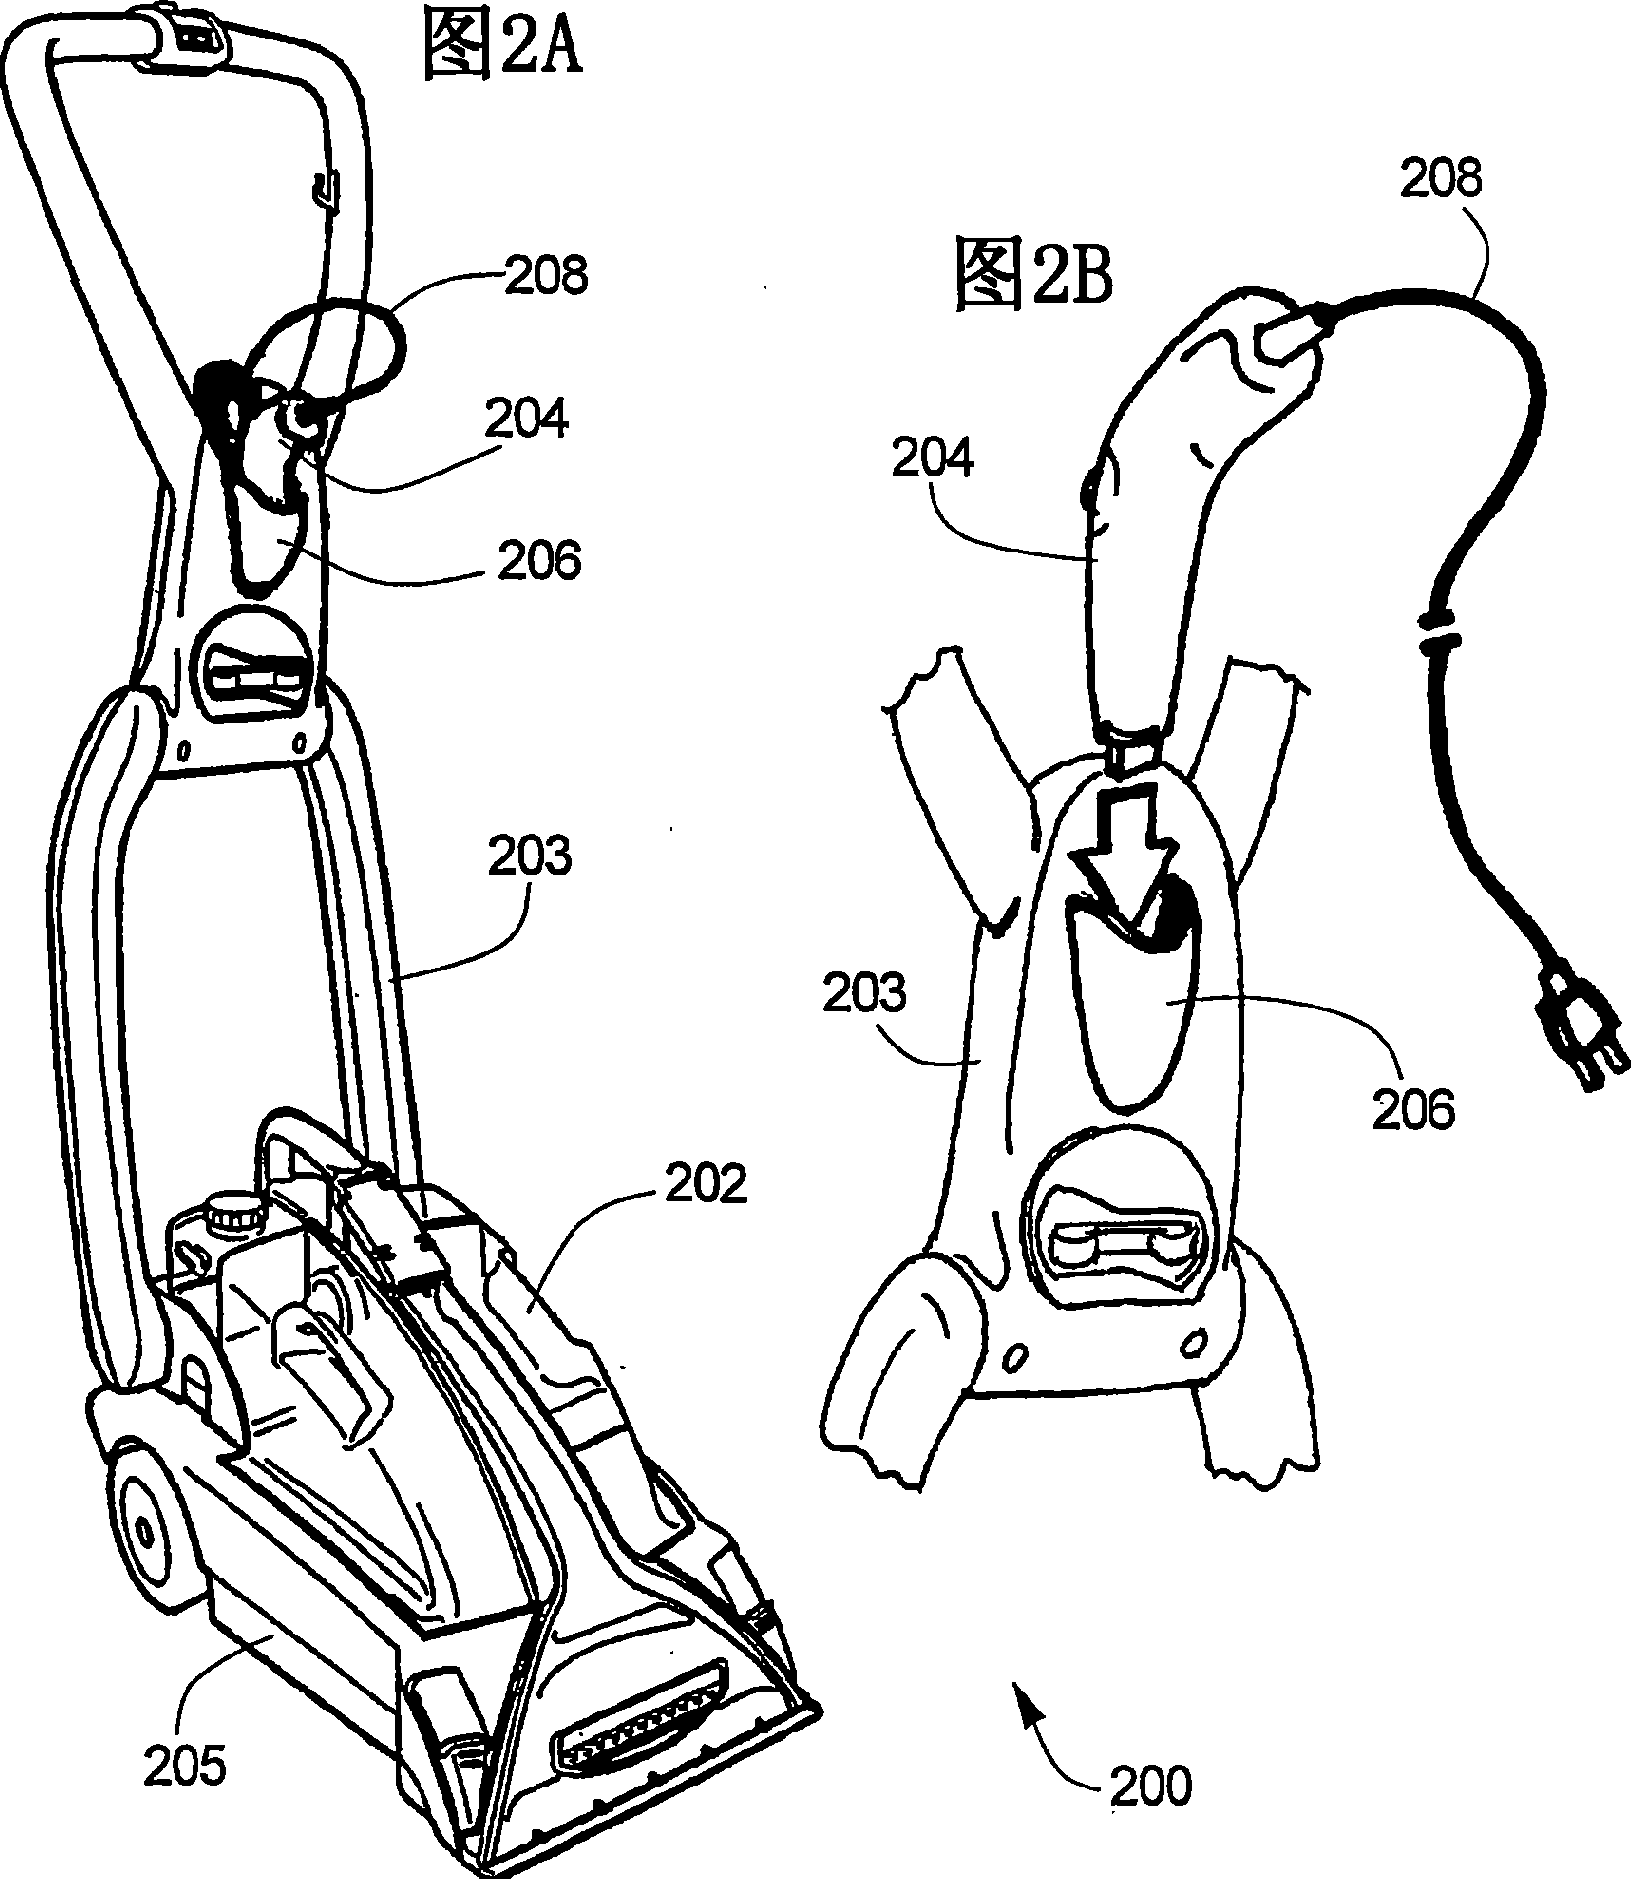 Apparatus and method for cleaning surfaces